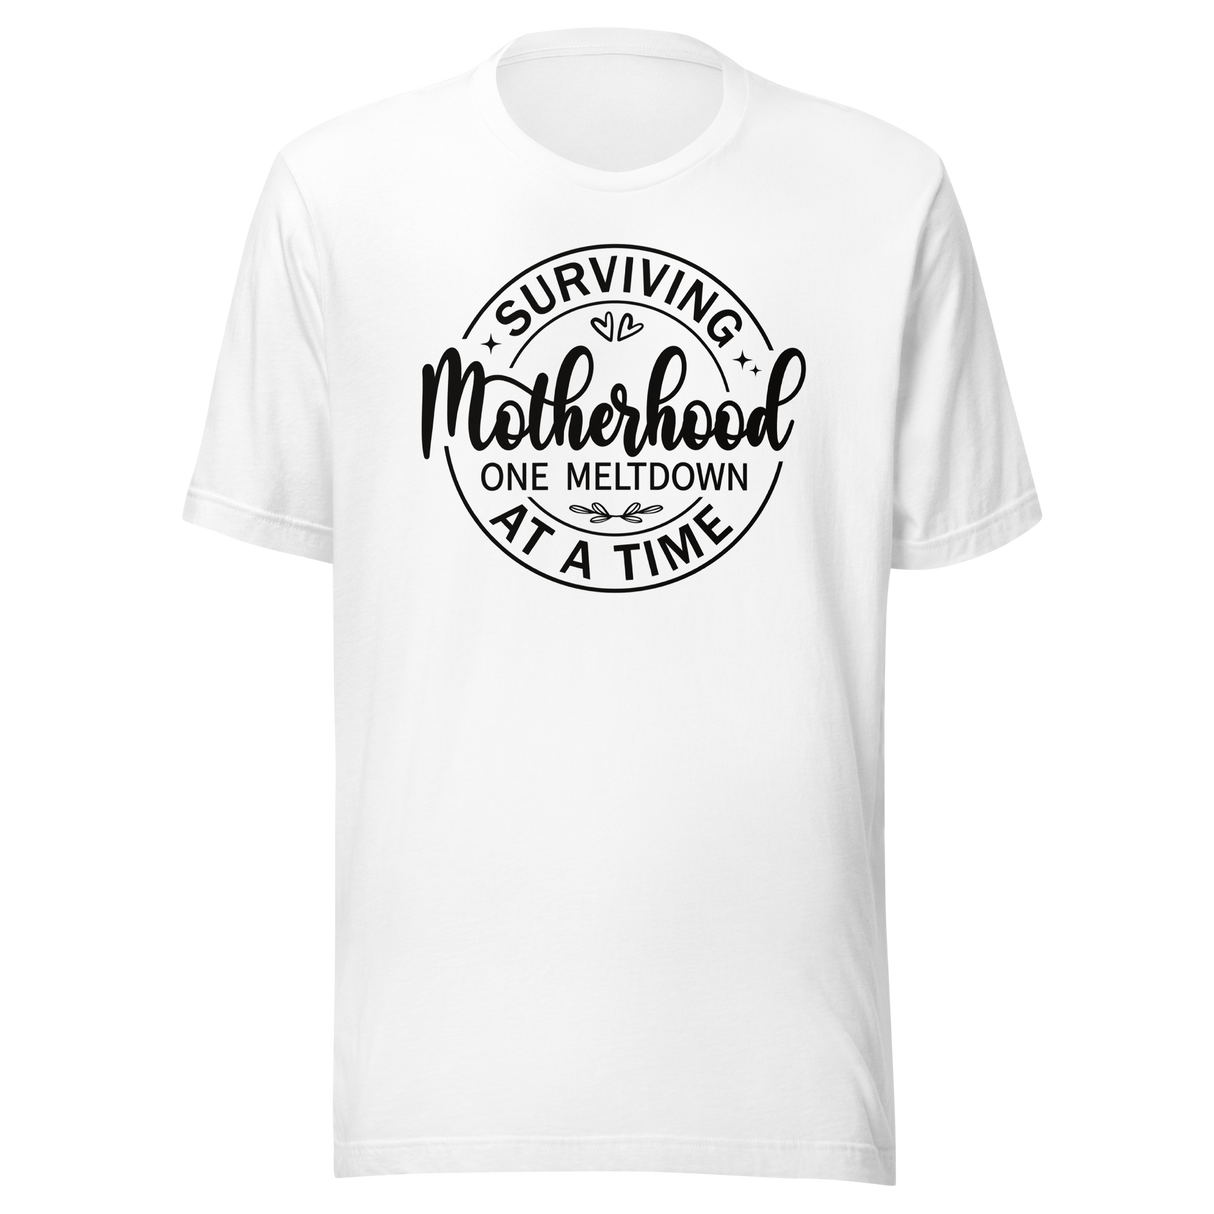 surviving-motherhood-one-meltdown-at-a-time-mom-tee-parents-t-shirt-mom-tee-motherhood-t-shirt-parenting-tee#color_white